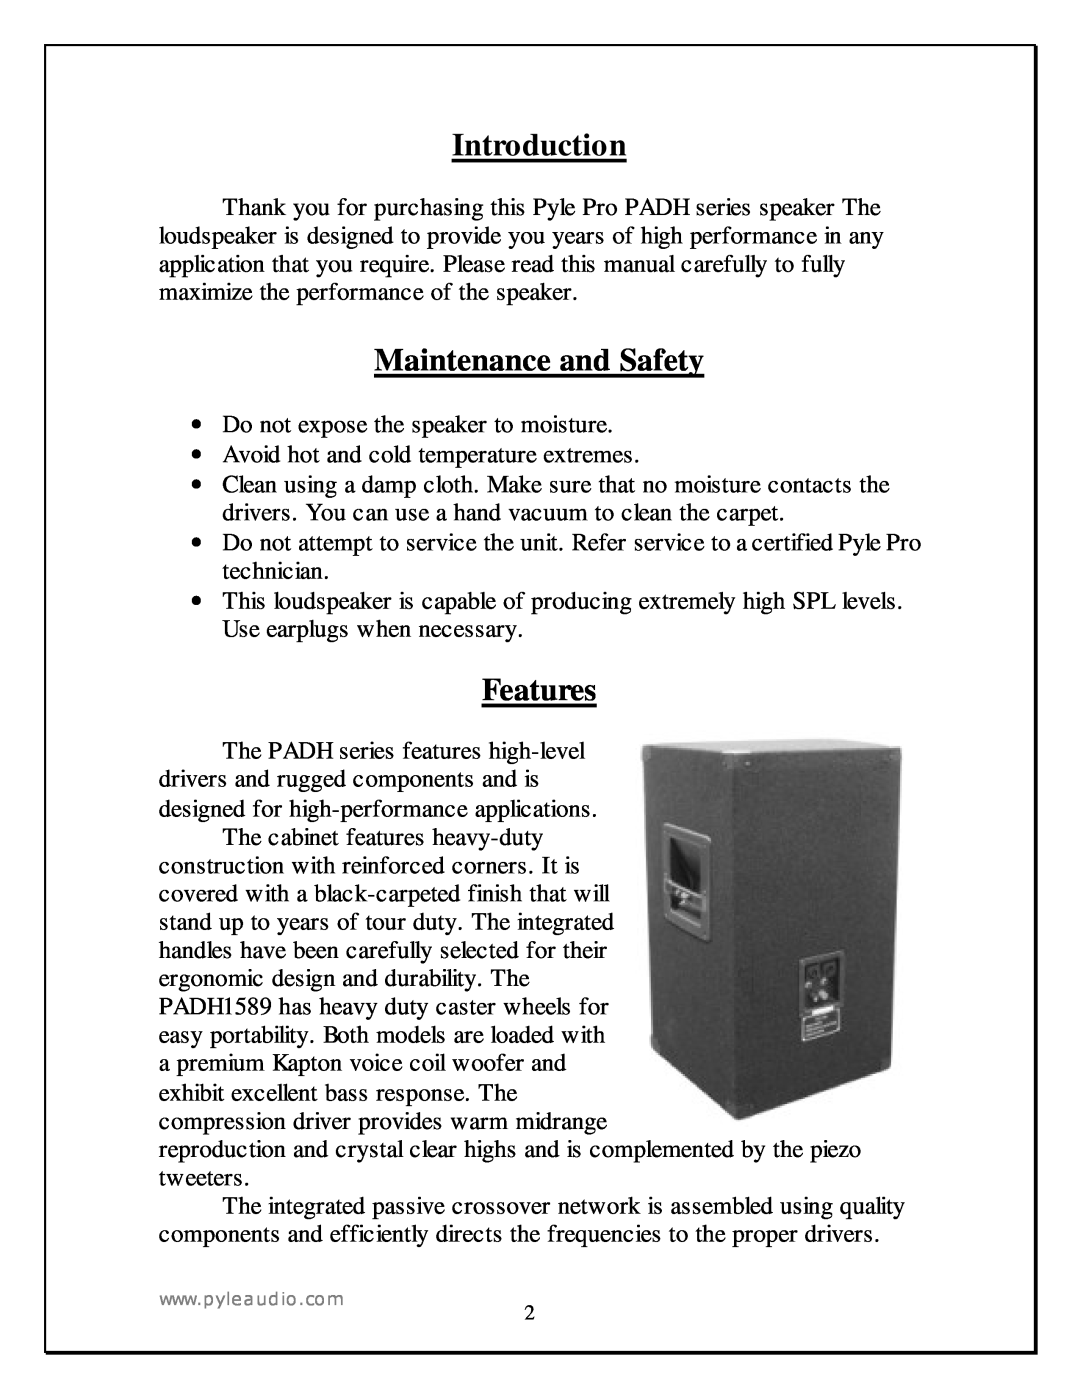 PYLE Audio PADH1589, PADH1289 manual Introduction, Maintenance and Safety, Features 